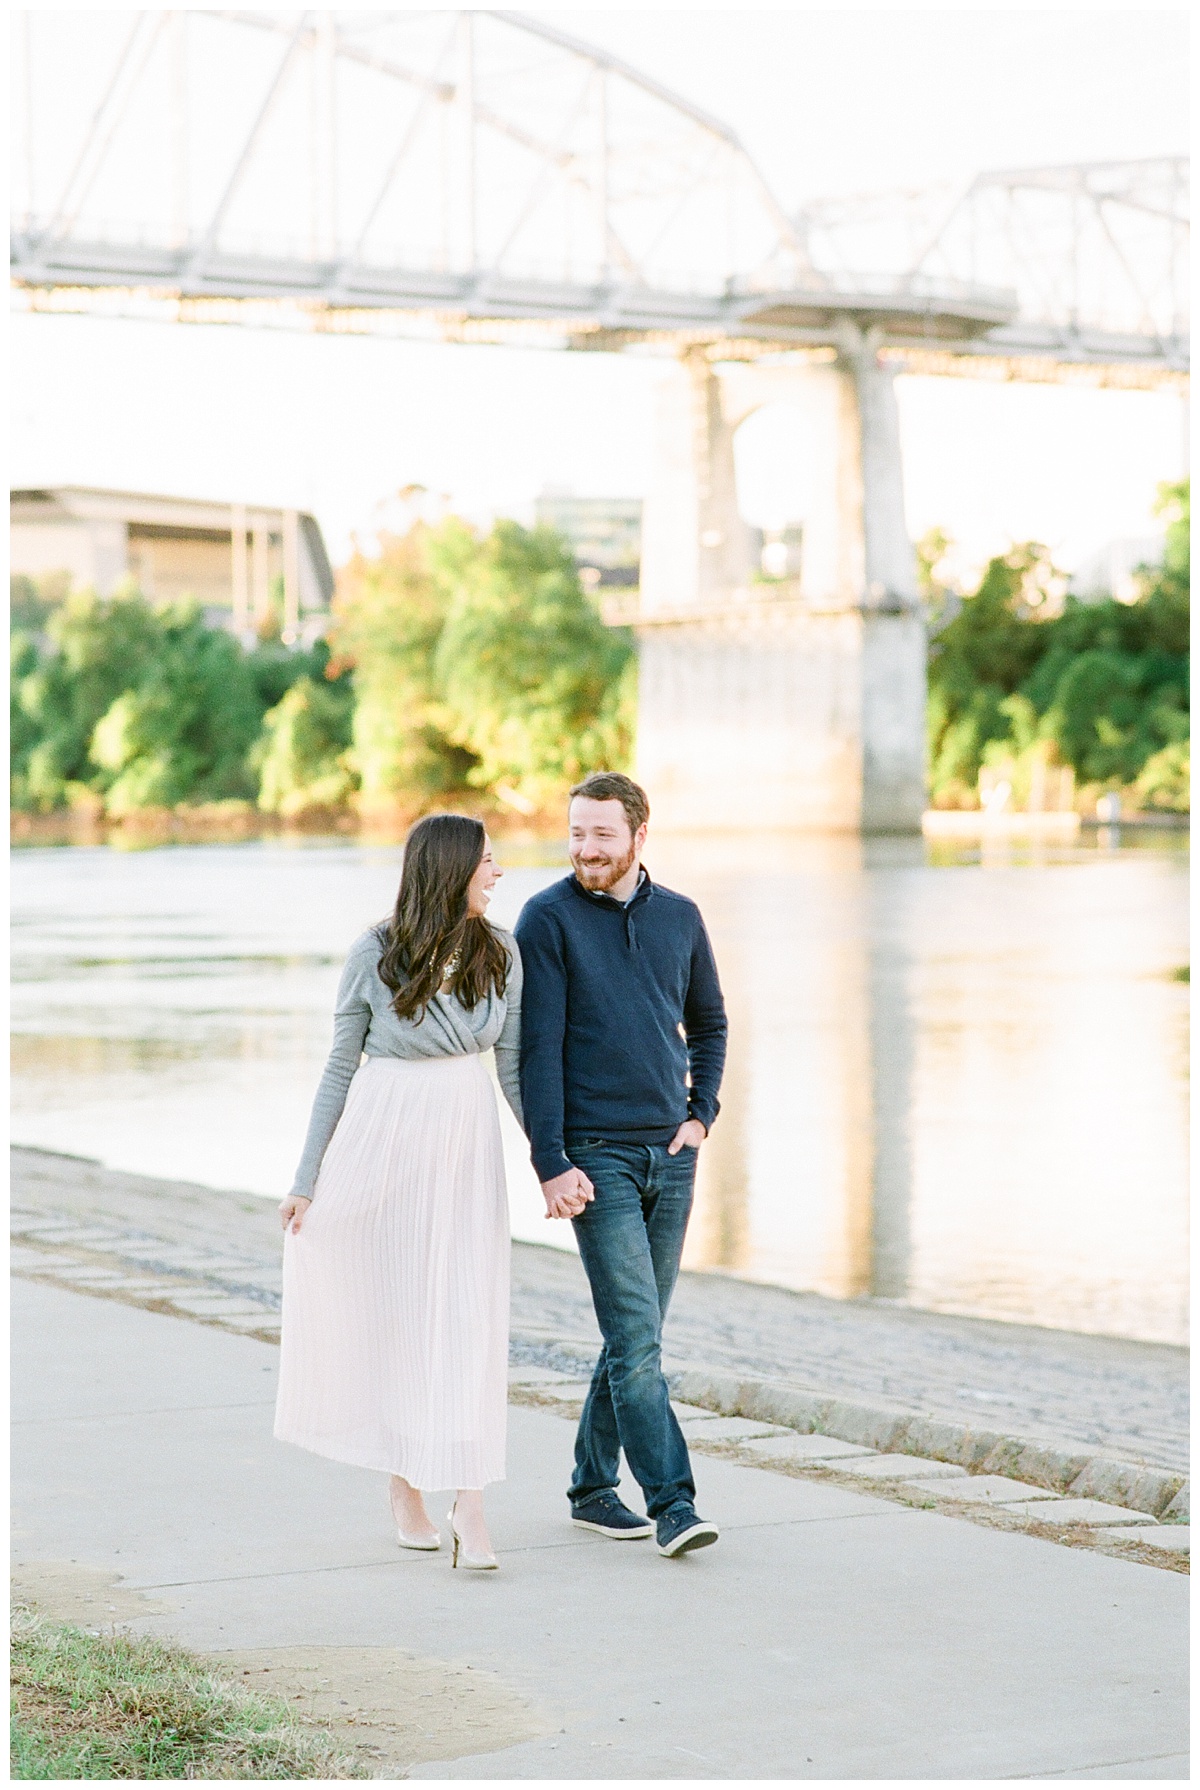 Nashville Couple walks downtown by the river during their maternity session by Grace Paul Photography. 